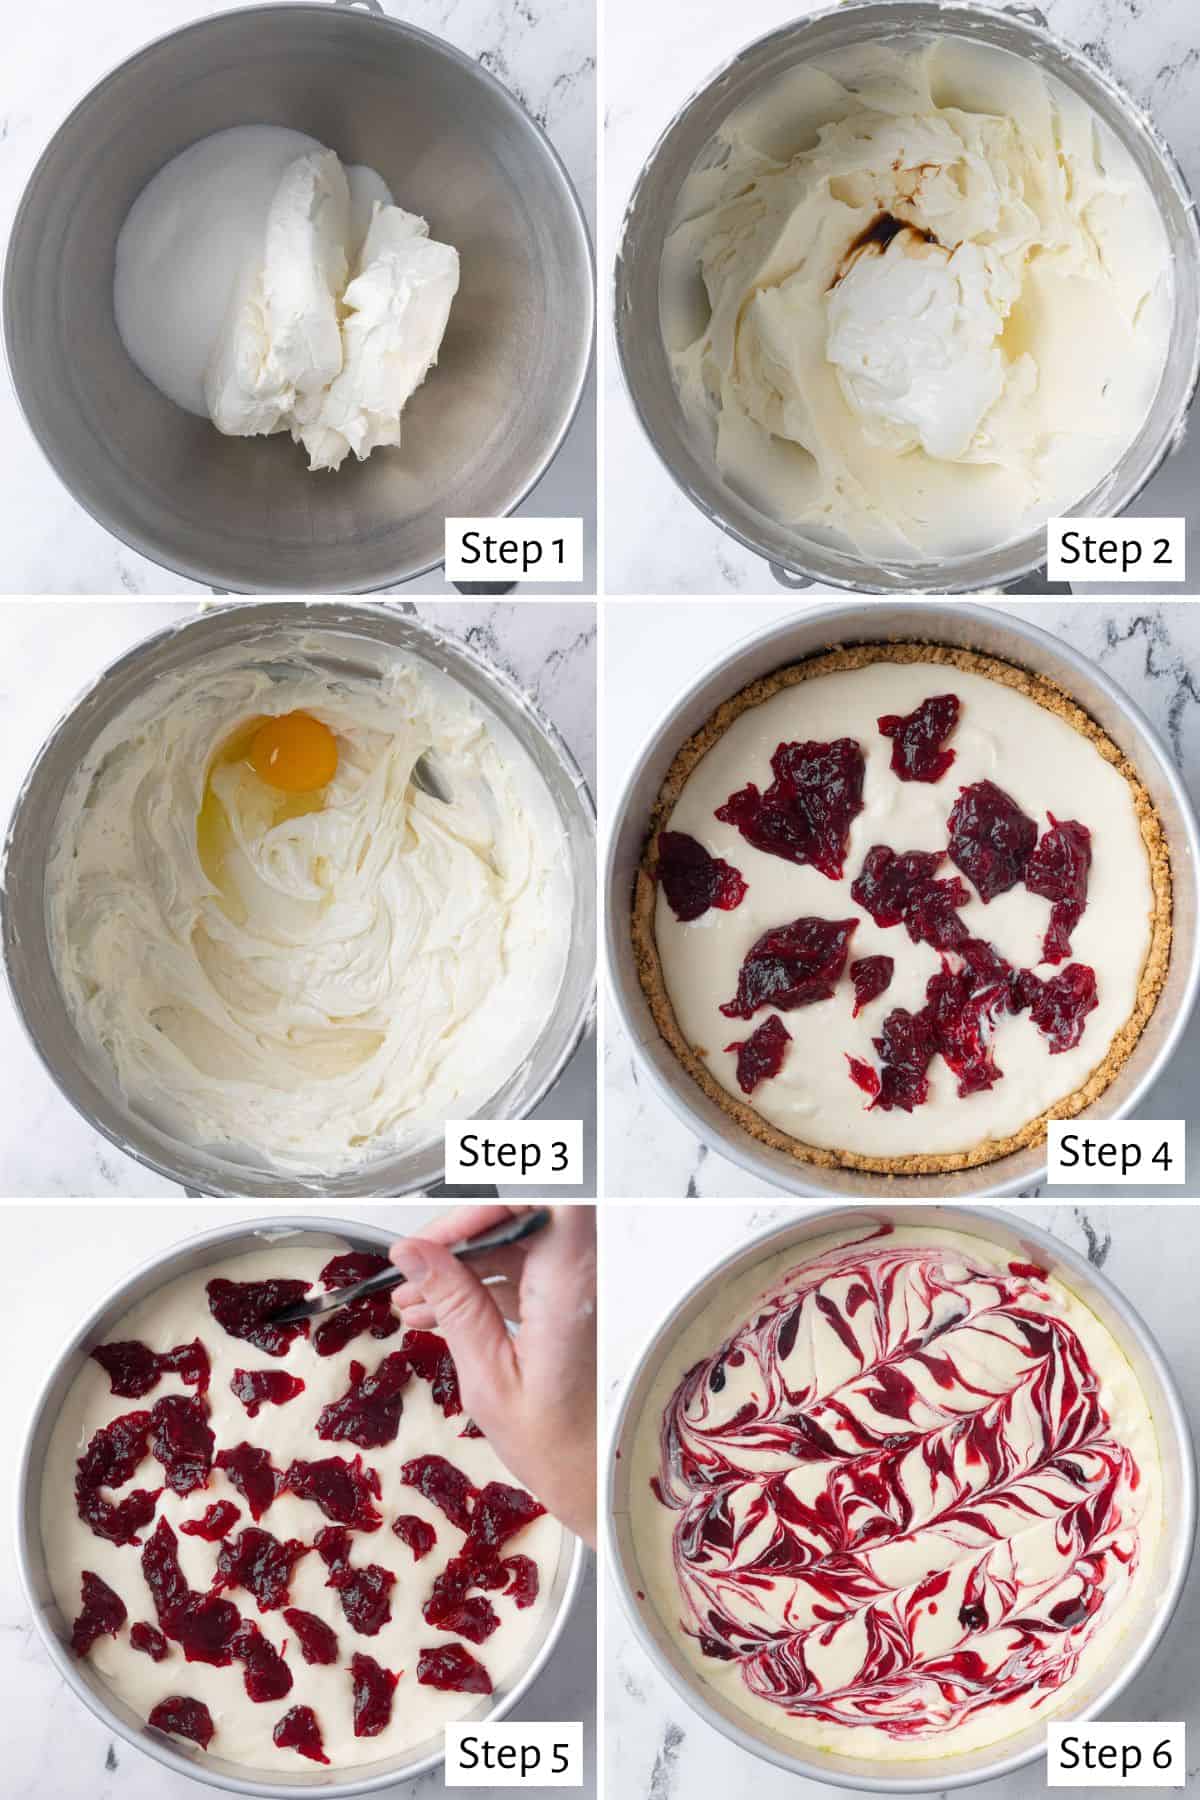 6 image collage making recipe: 1- cream cheese and sugar in a bowl before mixing, 2- after whipping together with sour cream and vanilla added, 3- egg added, 4- cheesecake poured into prepared crust with some of the cranberry sauce added, 5- after remaining cream cheese and cranberry added with a fork swirling it into mixture, 6- after swirling.